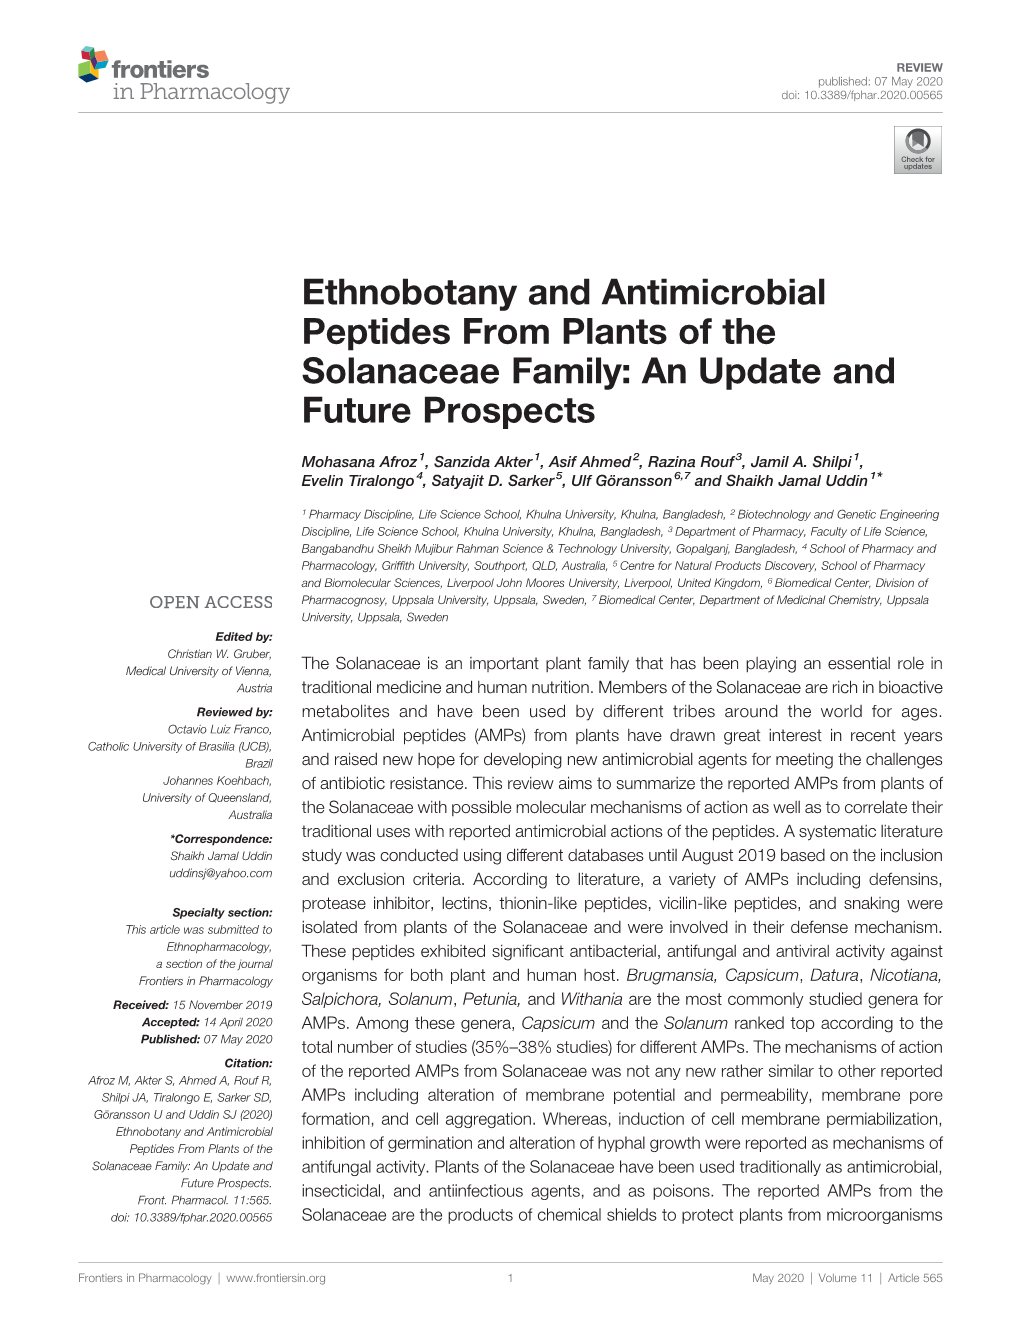 Ethnobotany and Antimicrobial Peptides from Plants of the Solanaceae Family: an Update and Future Prospects